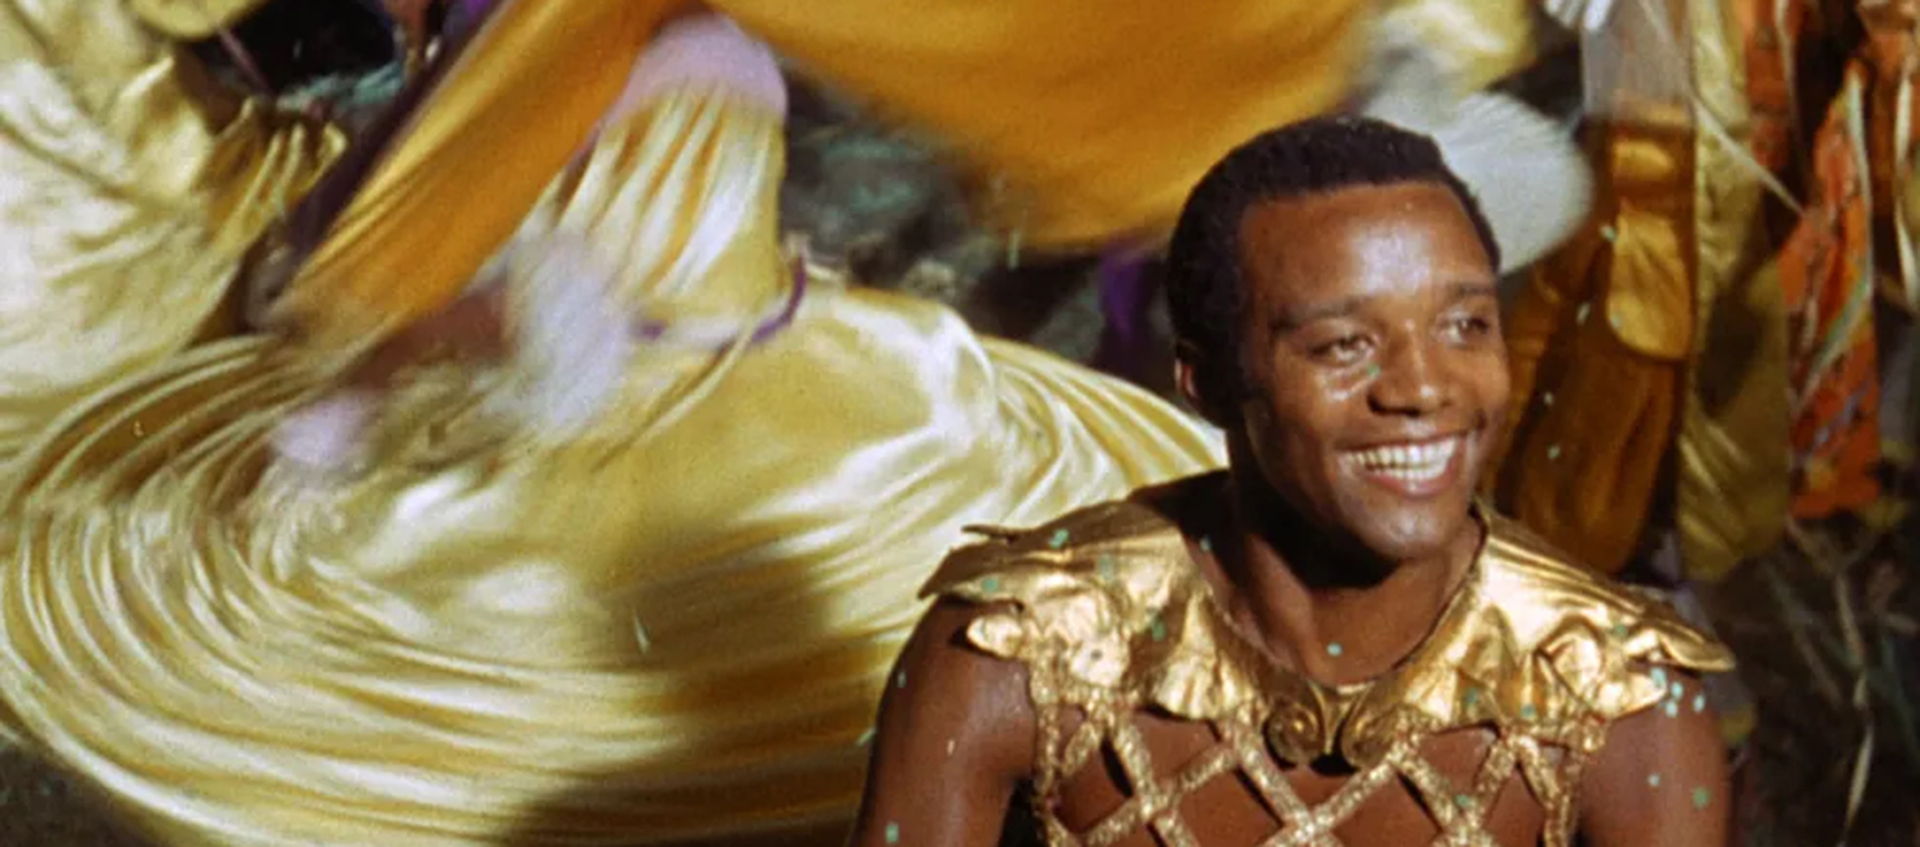 A young Black man wearing Roman garb sits in front of twirling dancers.